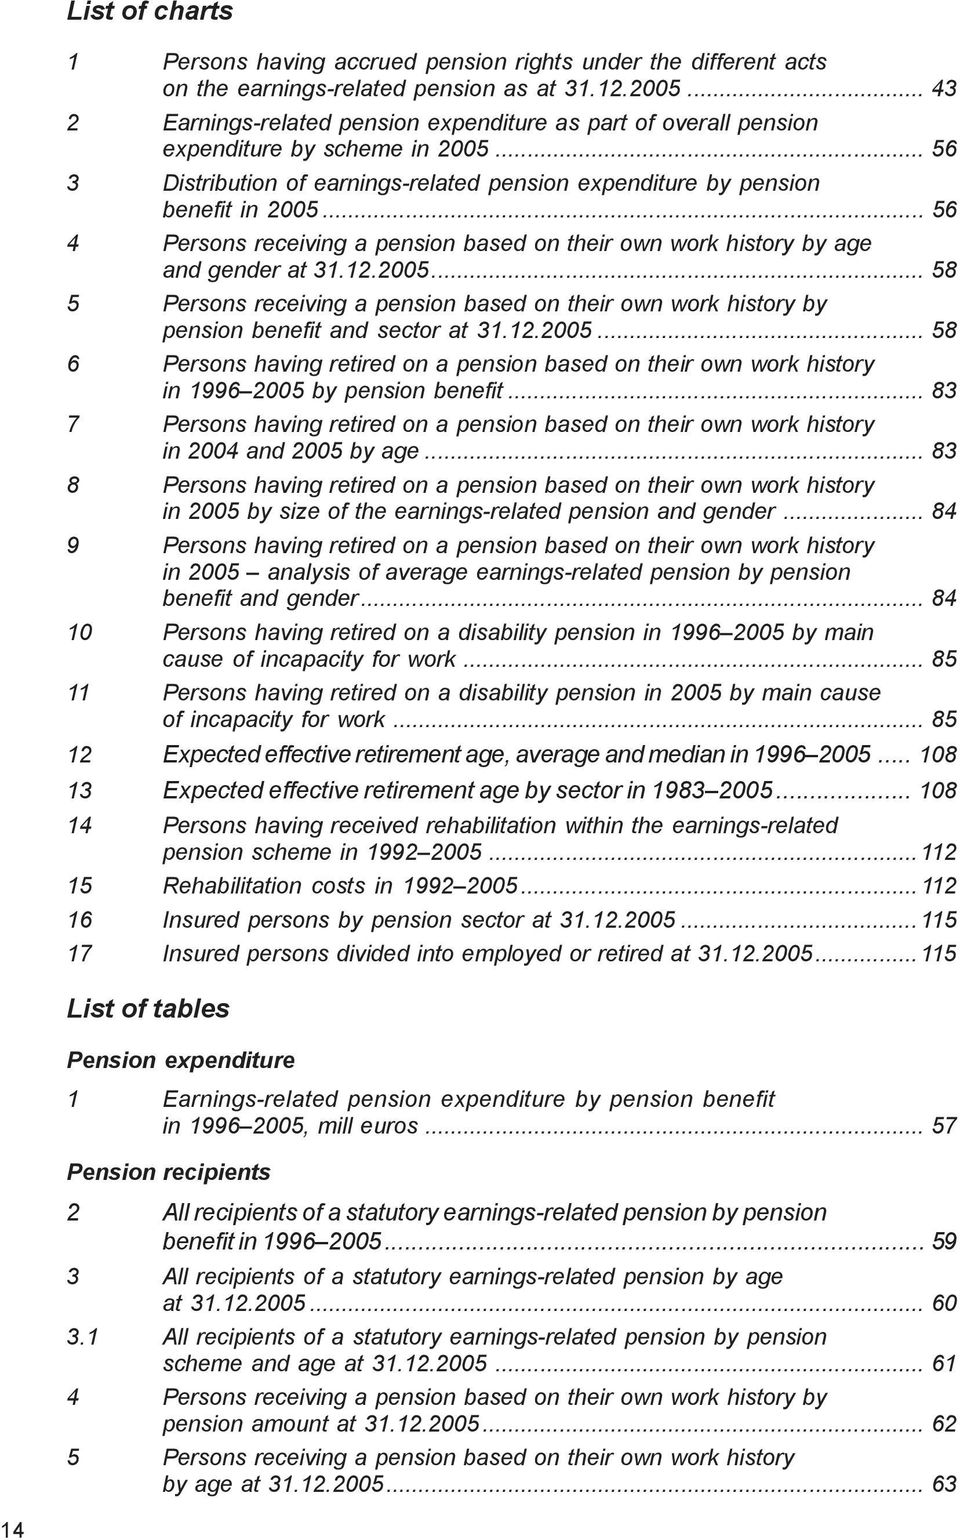 .. 56 4 Persons receiving a pension based on their own work history by age and gender at 31.12.2005.